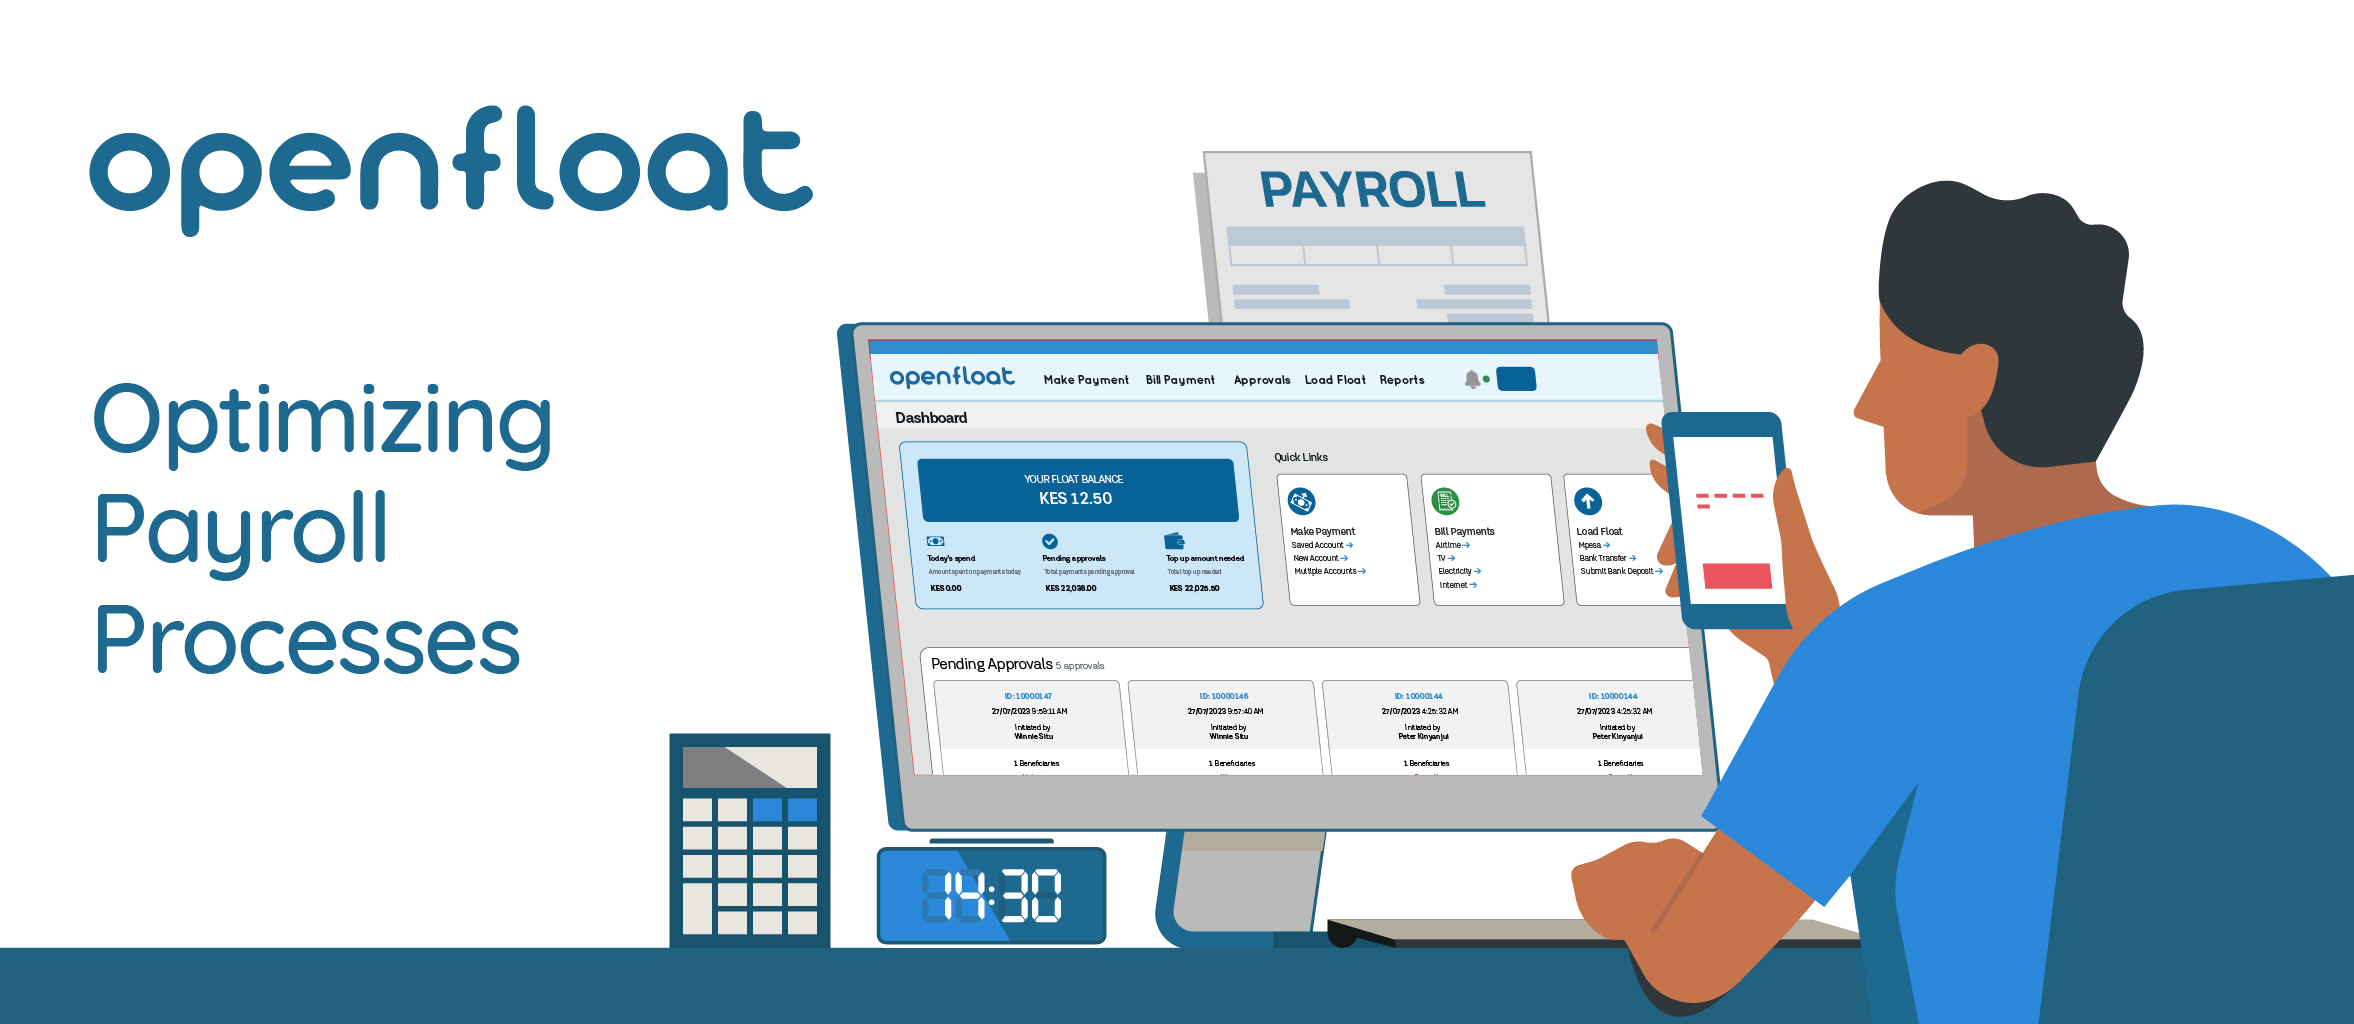 Optimizing Payroll Processes: A Guide to Using Openfloat for Easy Payments